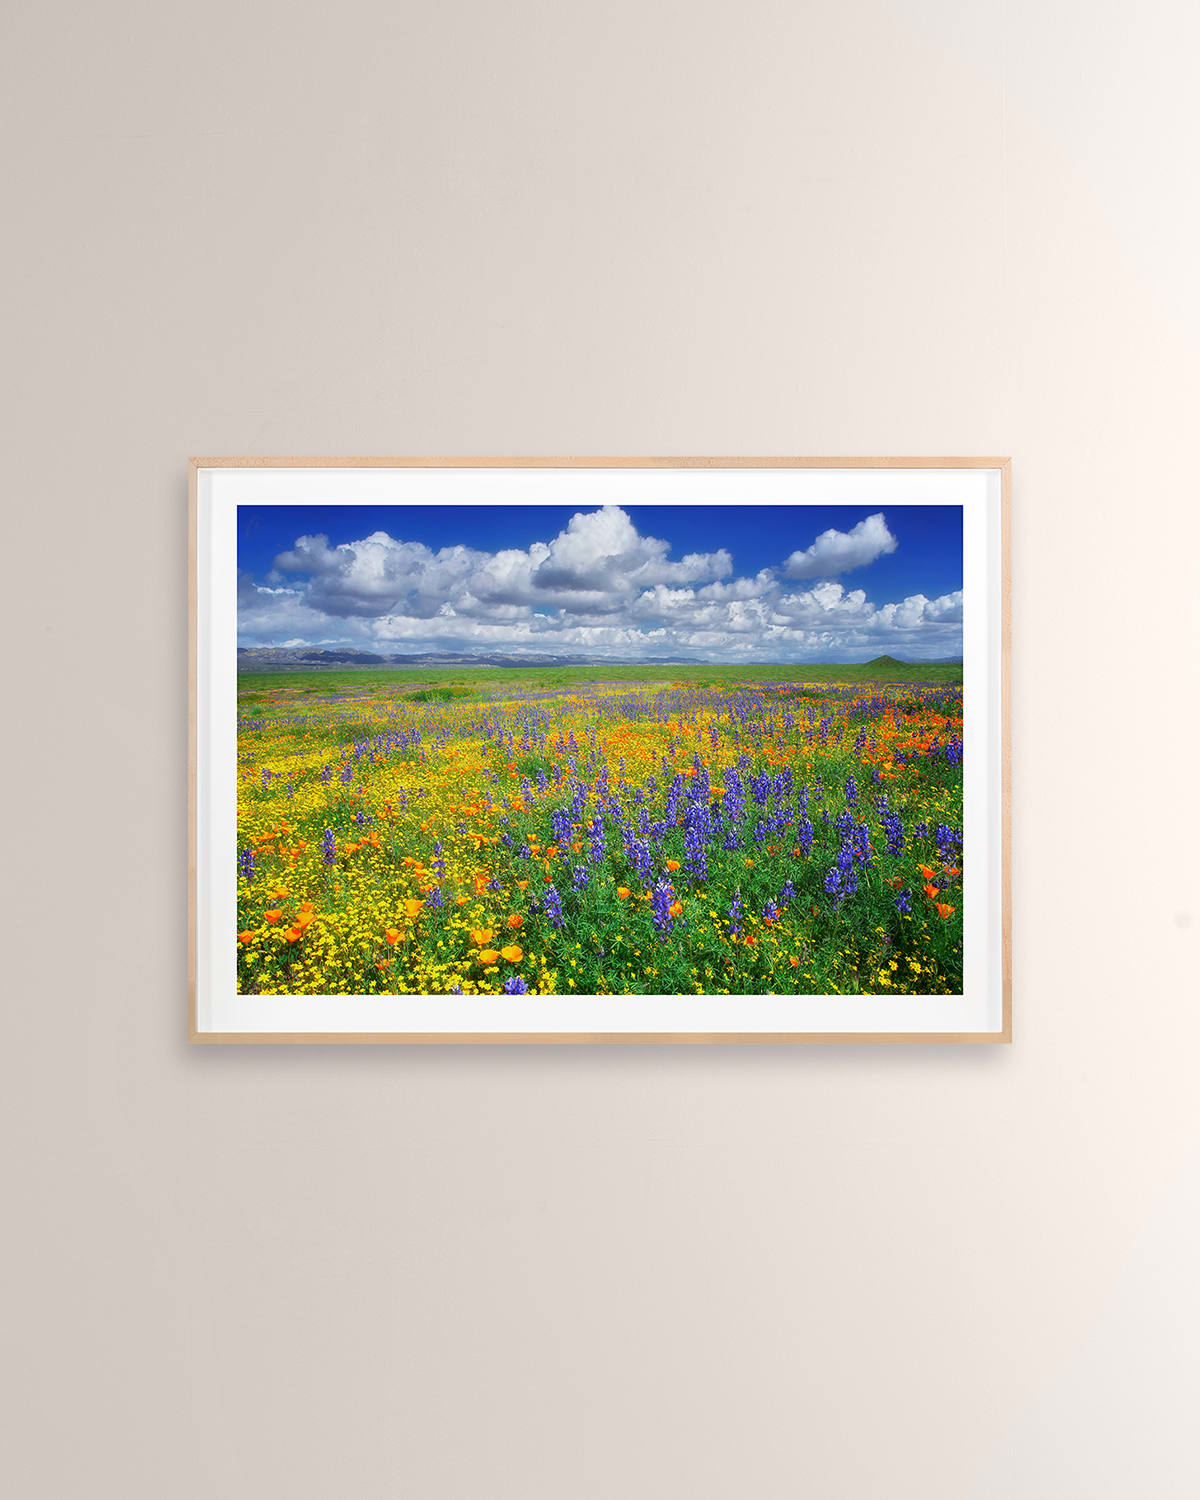 Grand Image Home Lupin And Poppies, Carrizo Plain National Monument Digital Art Print By Photodf